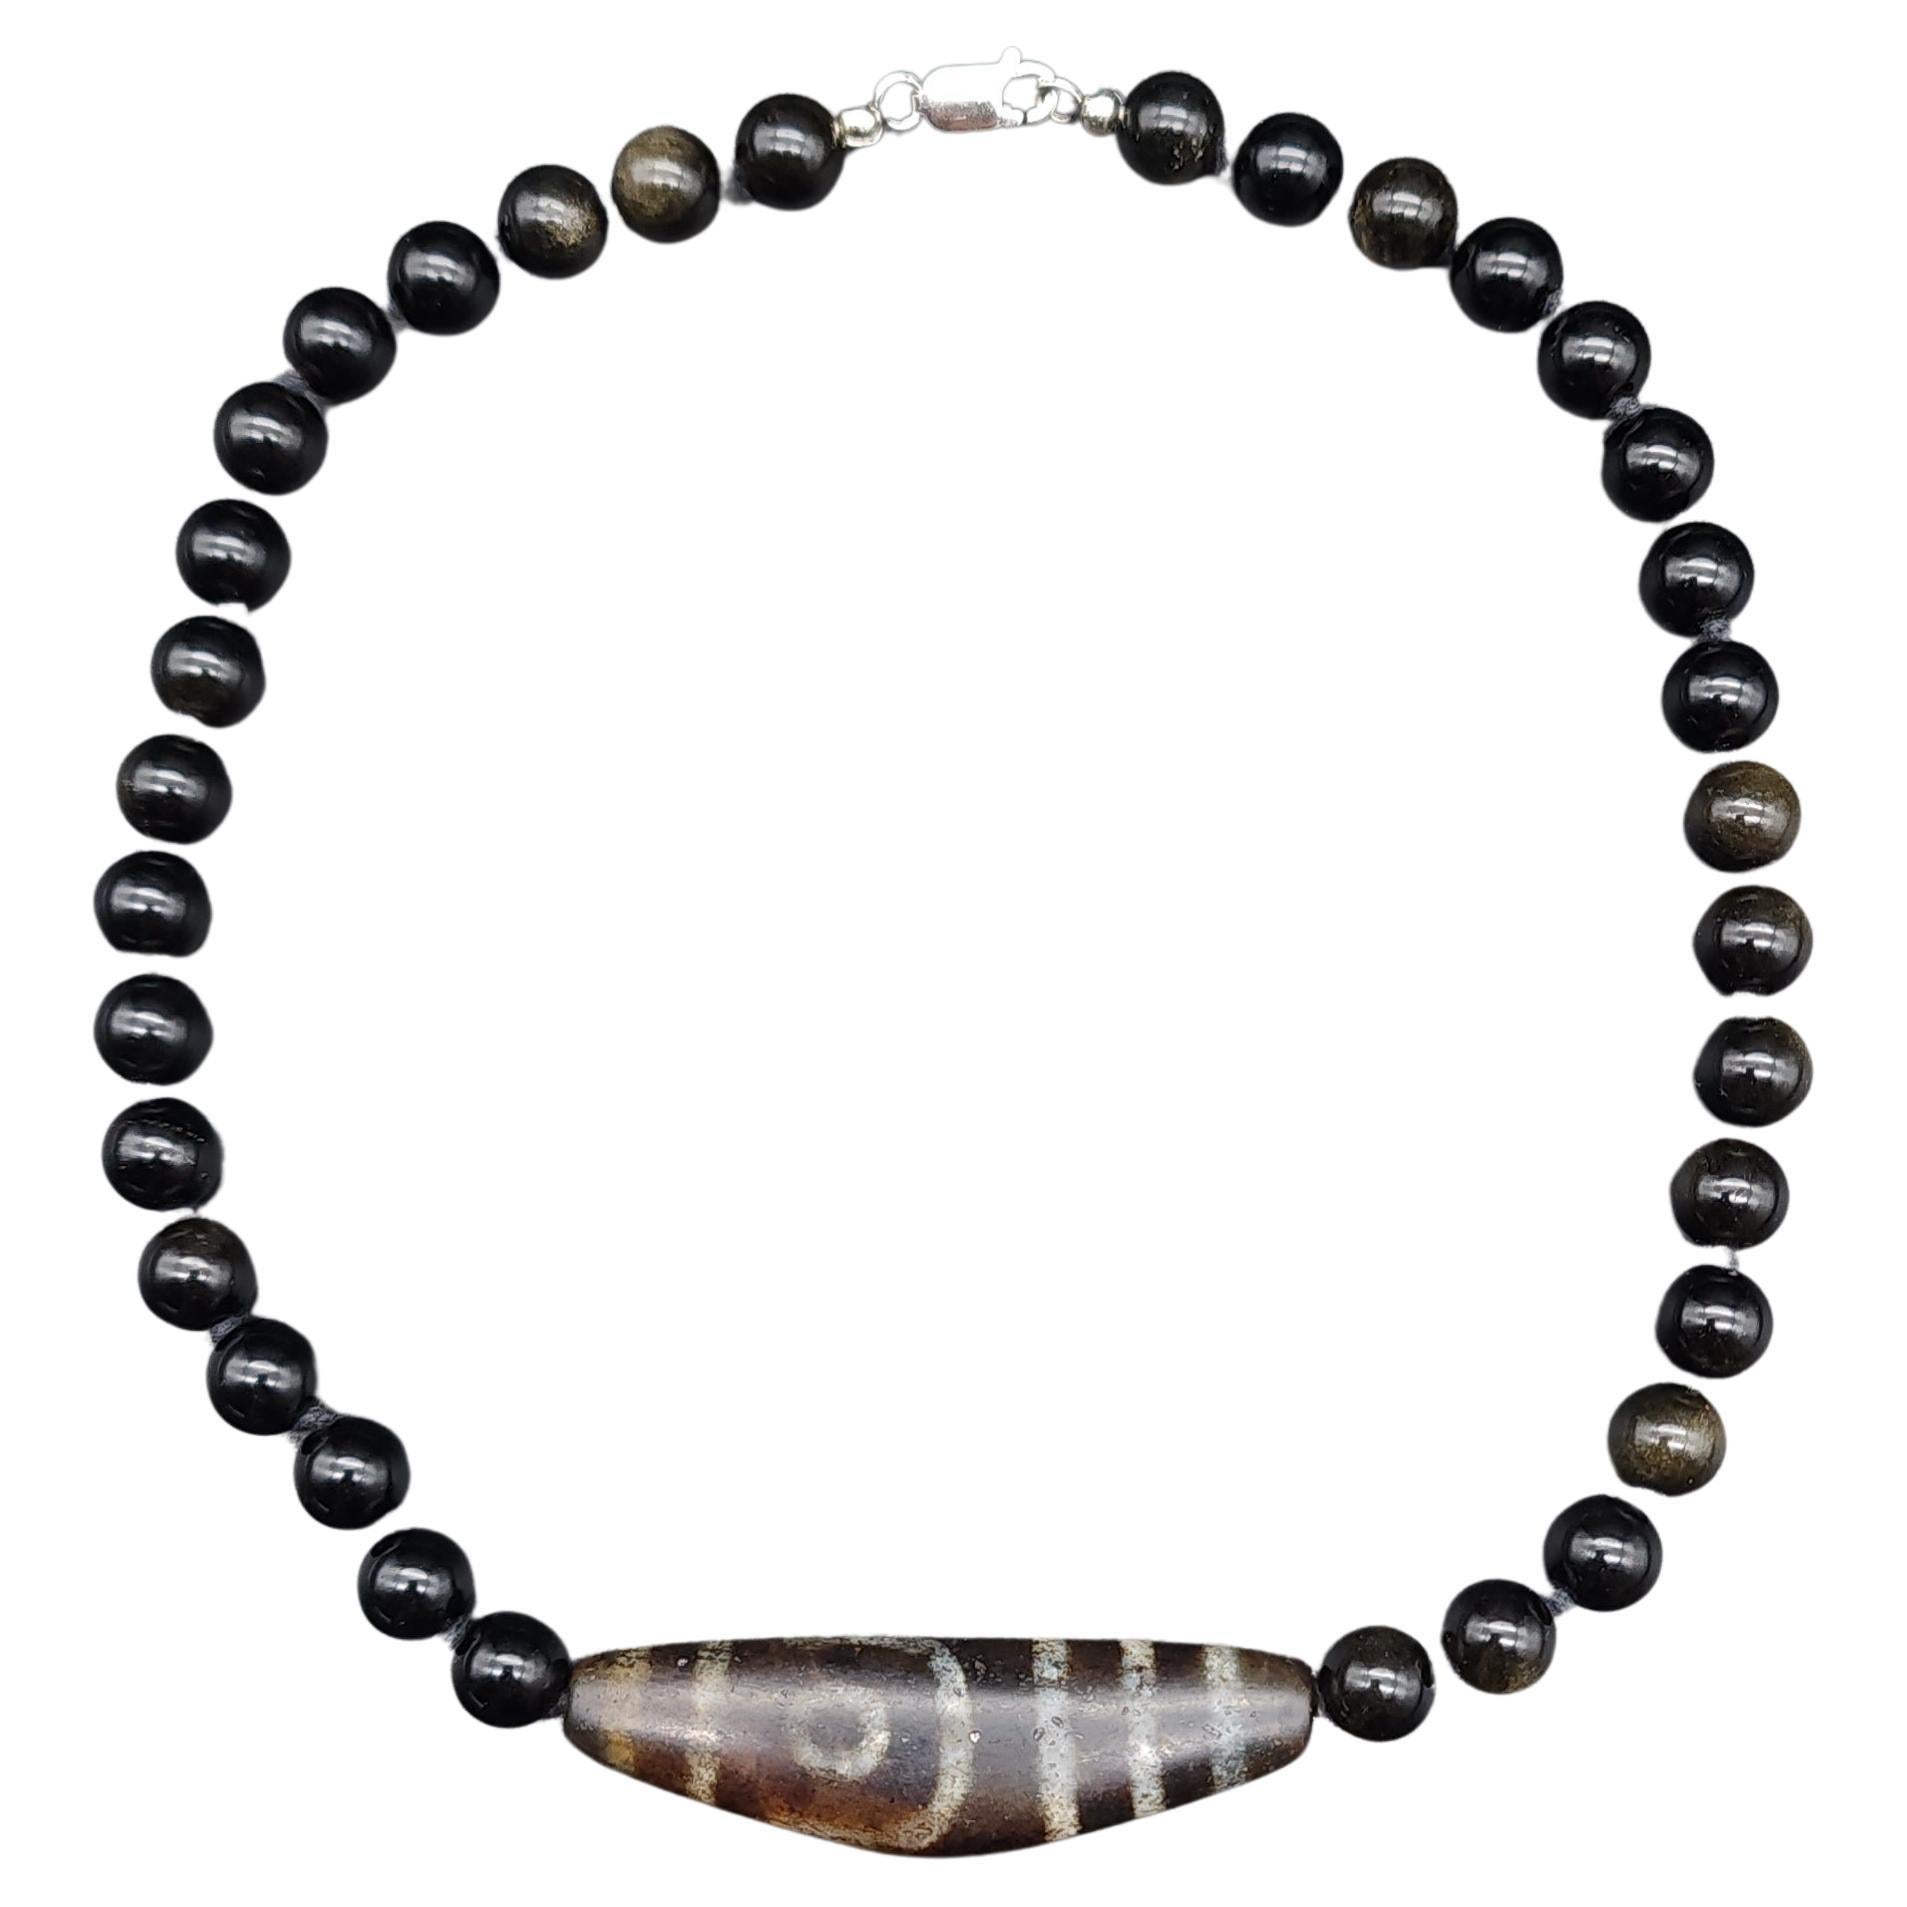 Dzi Pendant Centerpiece, Obsidian Beads Knotted Necklace  Sterling Silver Clasp For Sale